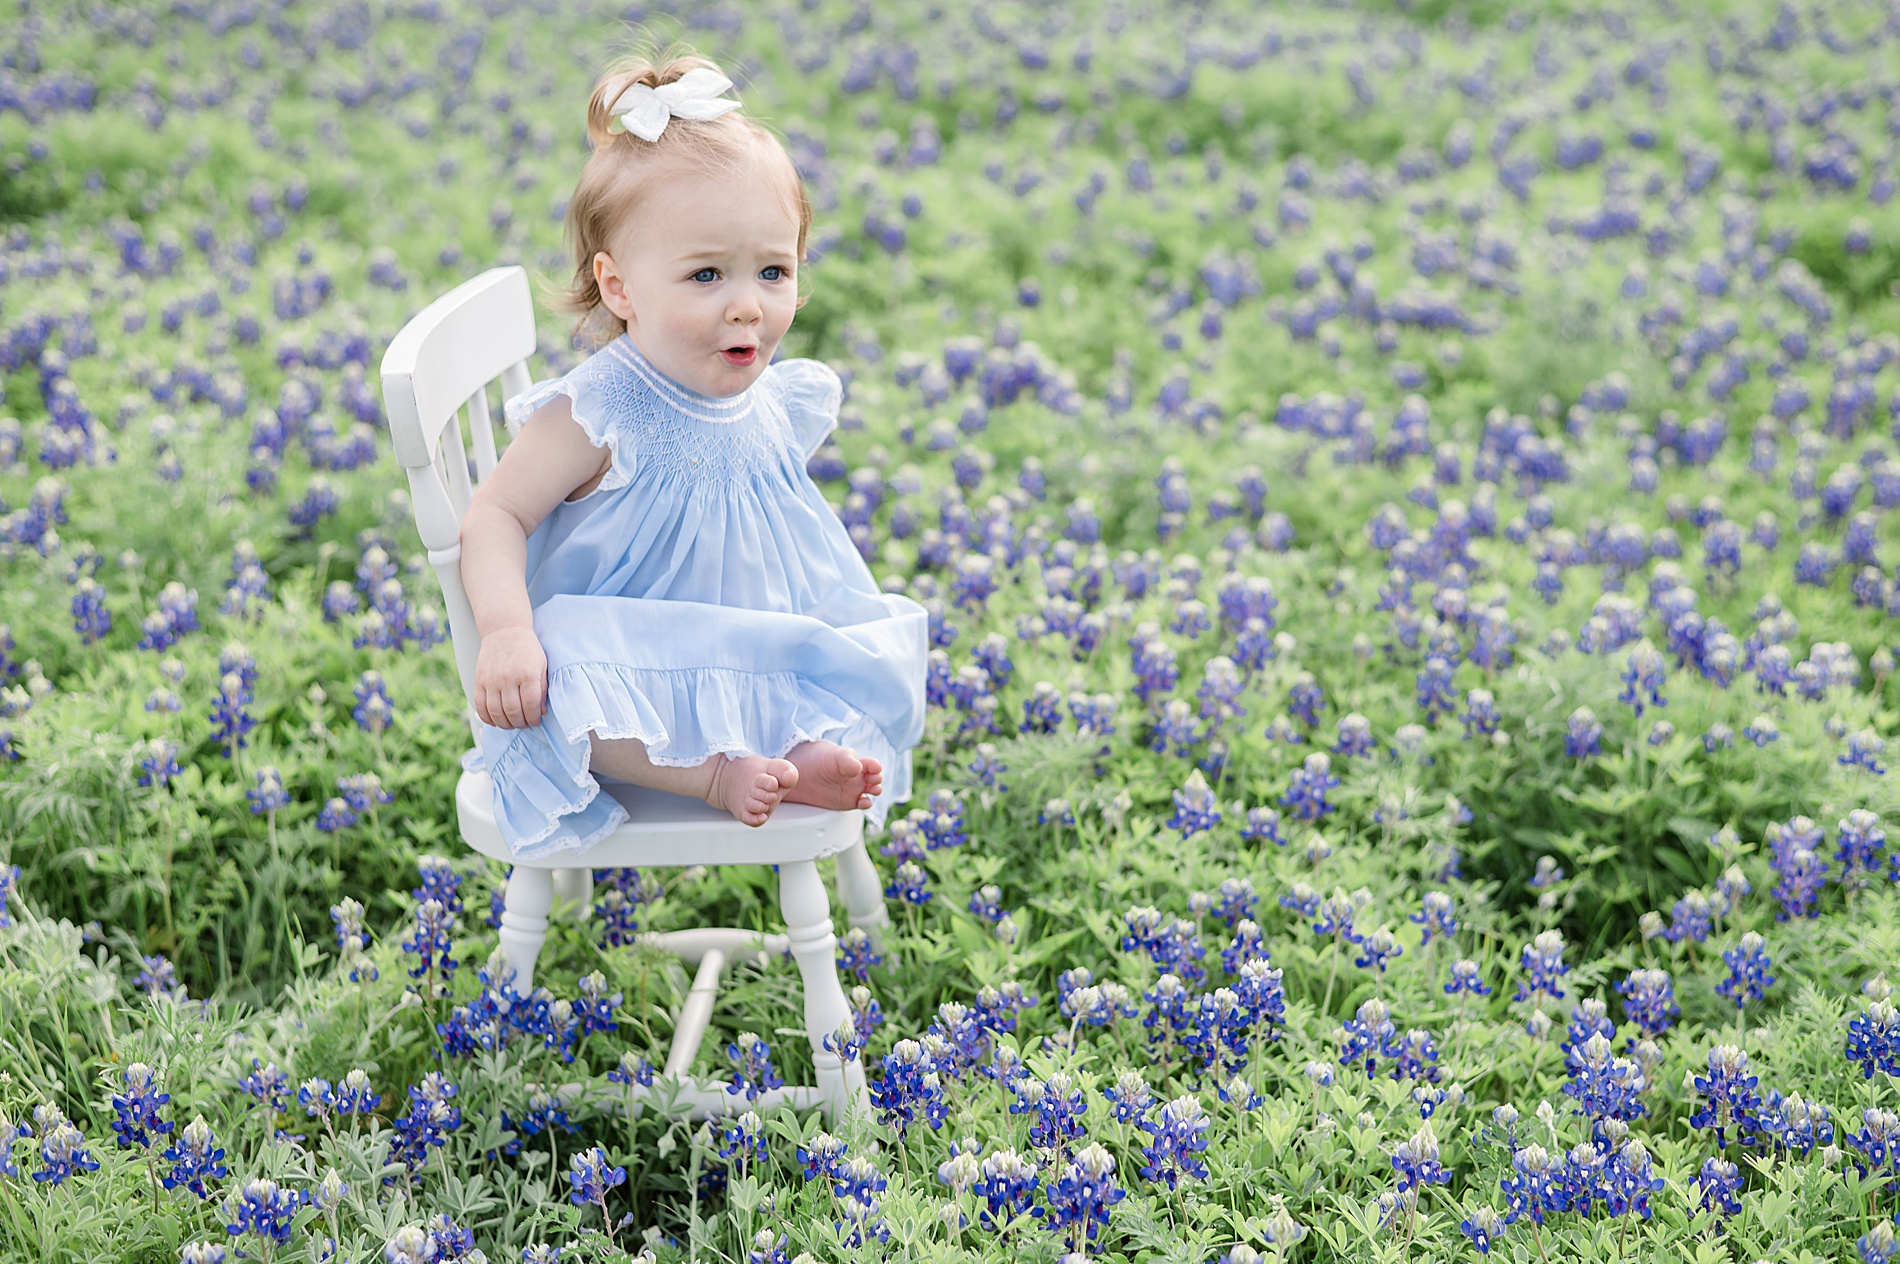 candid portraits of little girl during Dallas Texas Bluebonnet Photos taken by Lindsey Dutton Photography, a Dallas family photographer